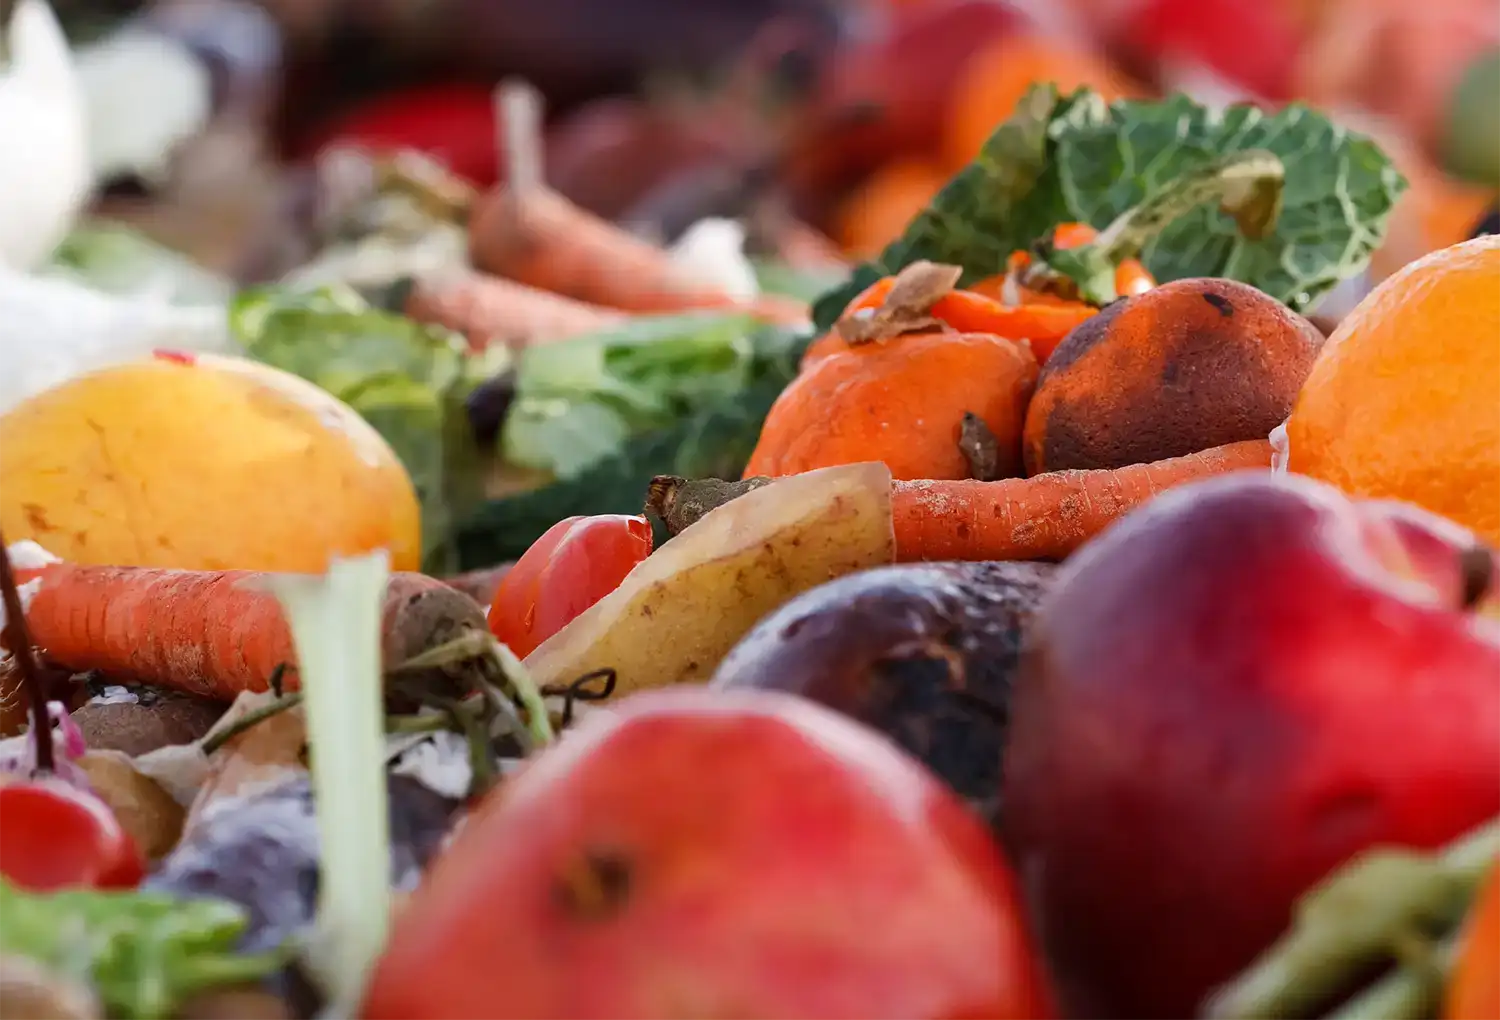 Government invests £295 million to help English councils start separate food waste collections